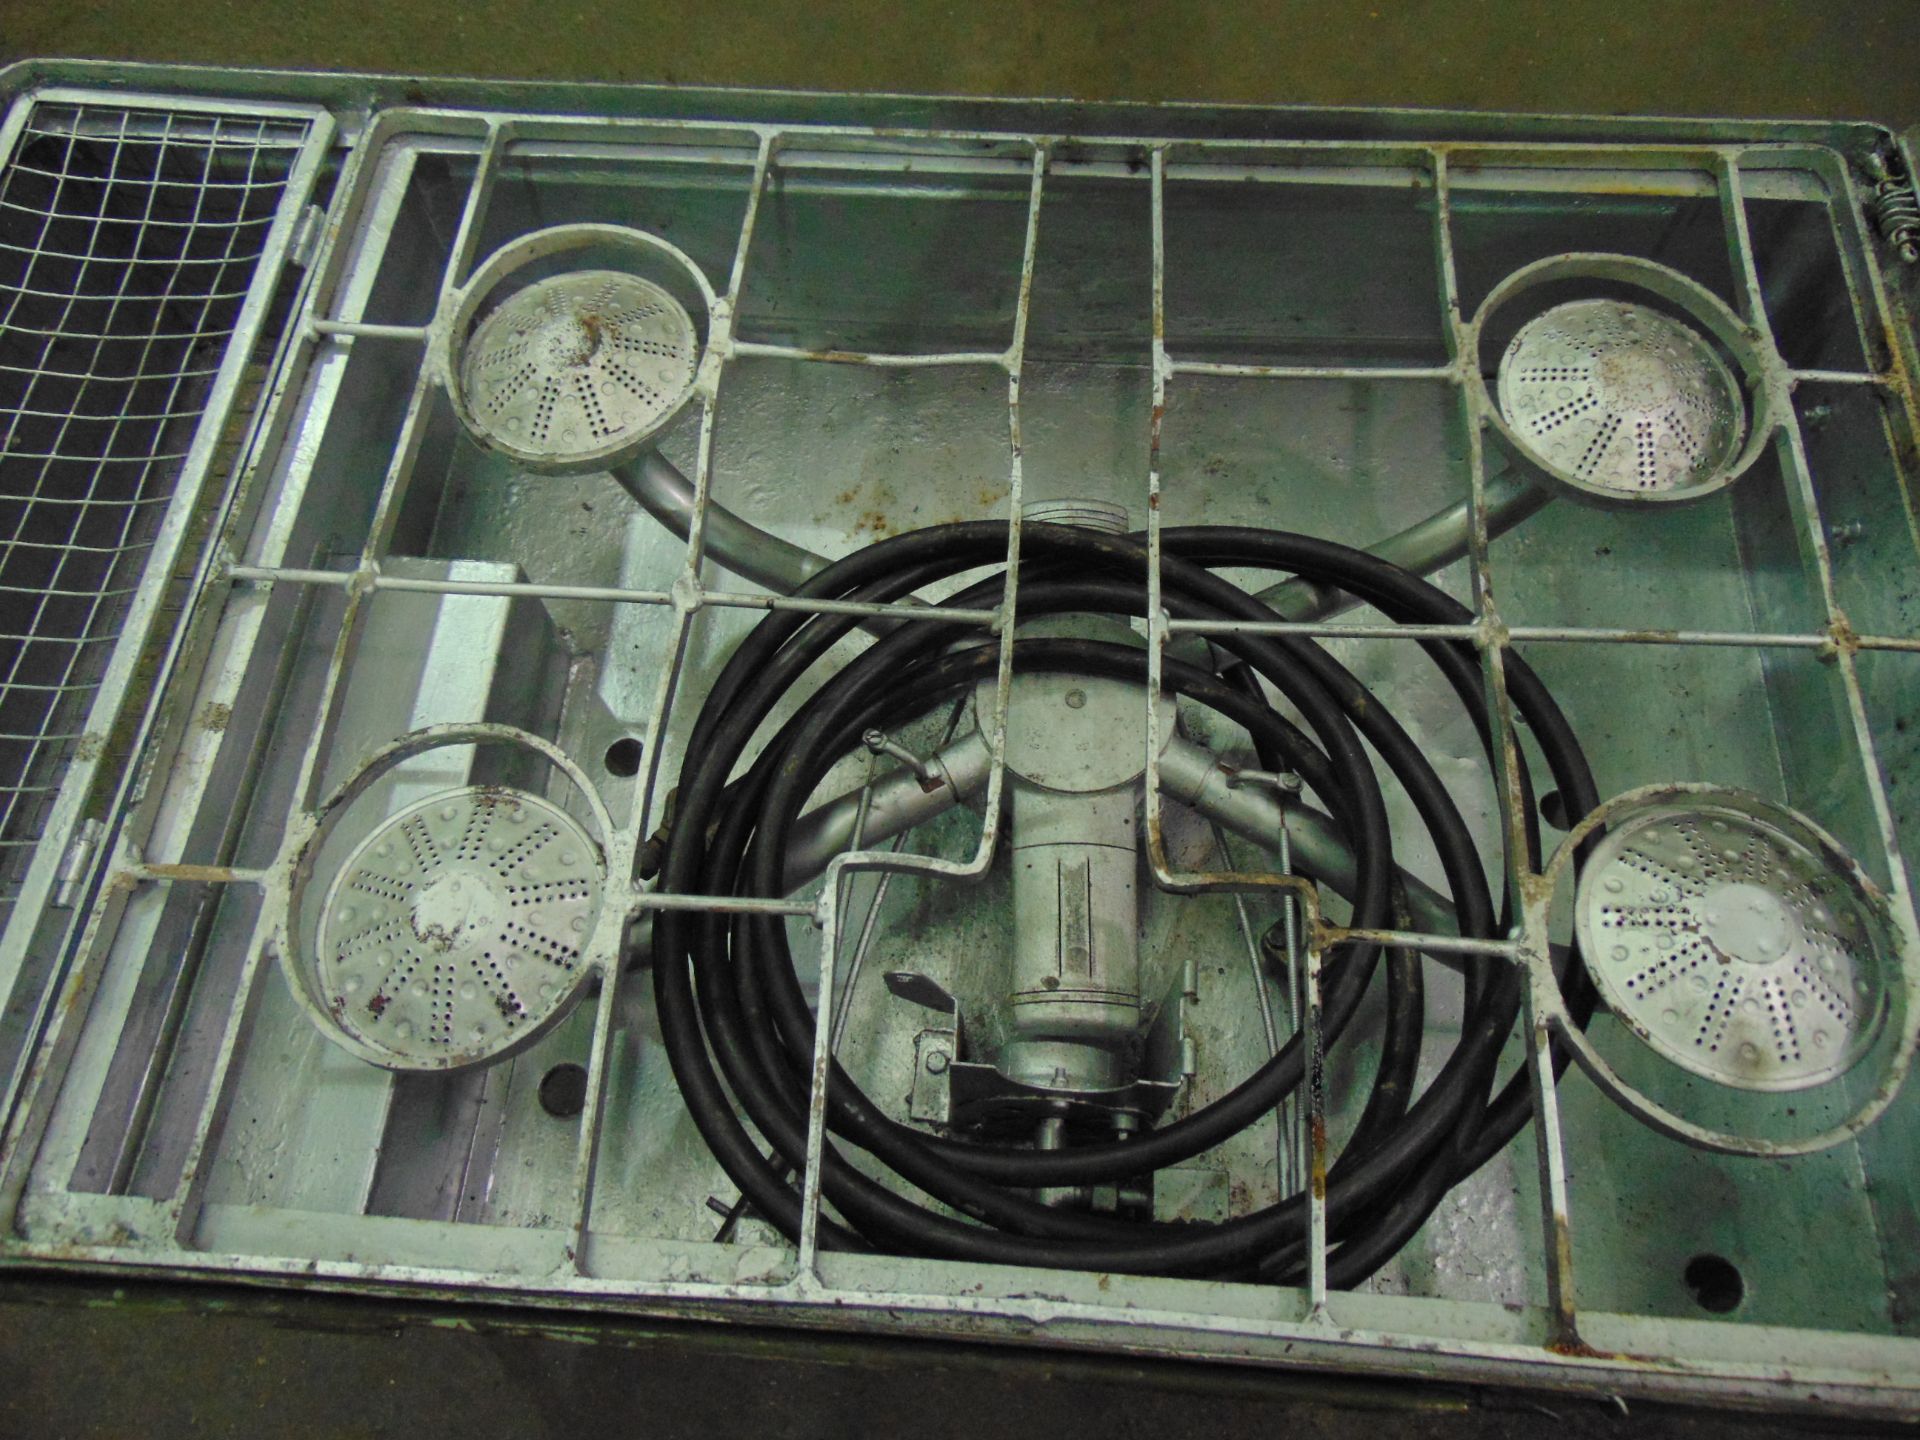 Field Kitchen No5 4 Burner Propane Cooking Stove - Image 6 of 7